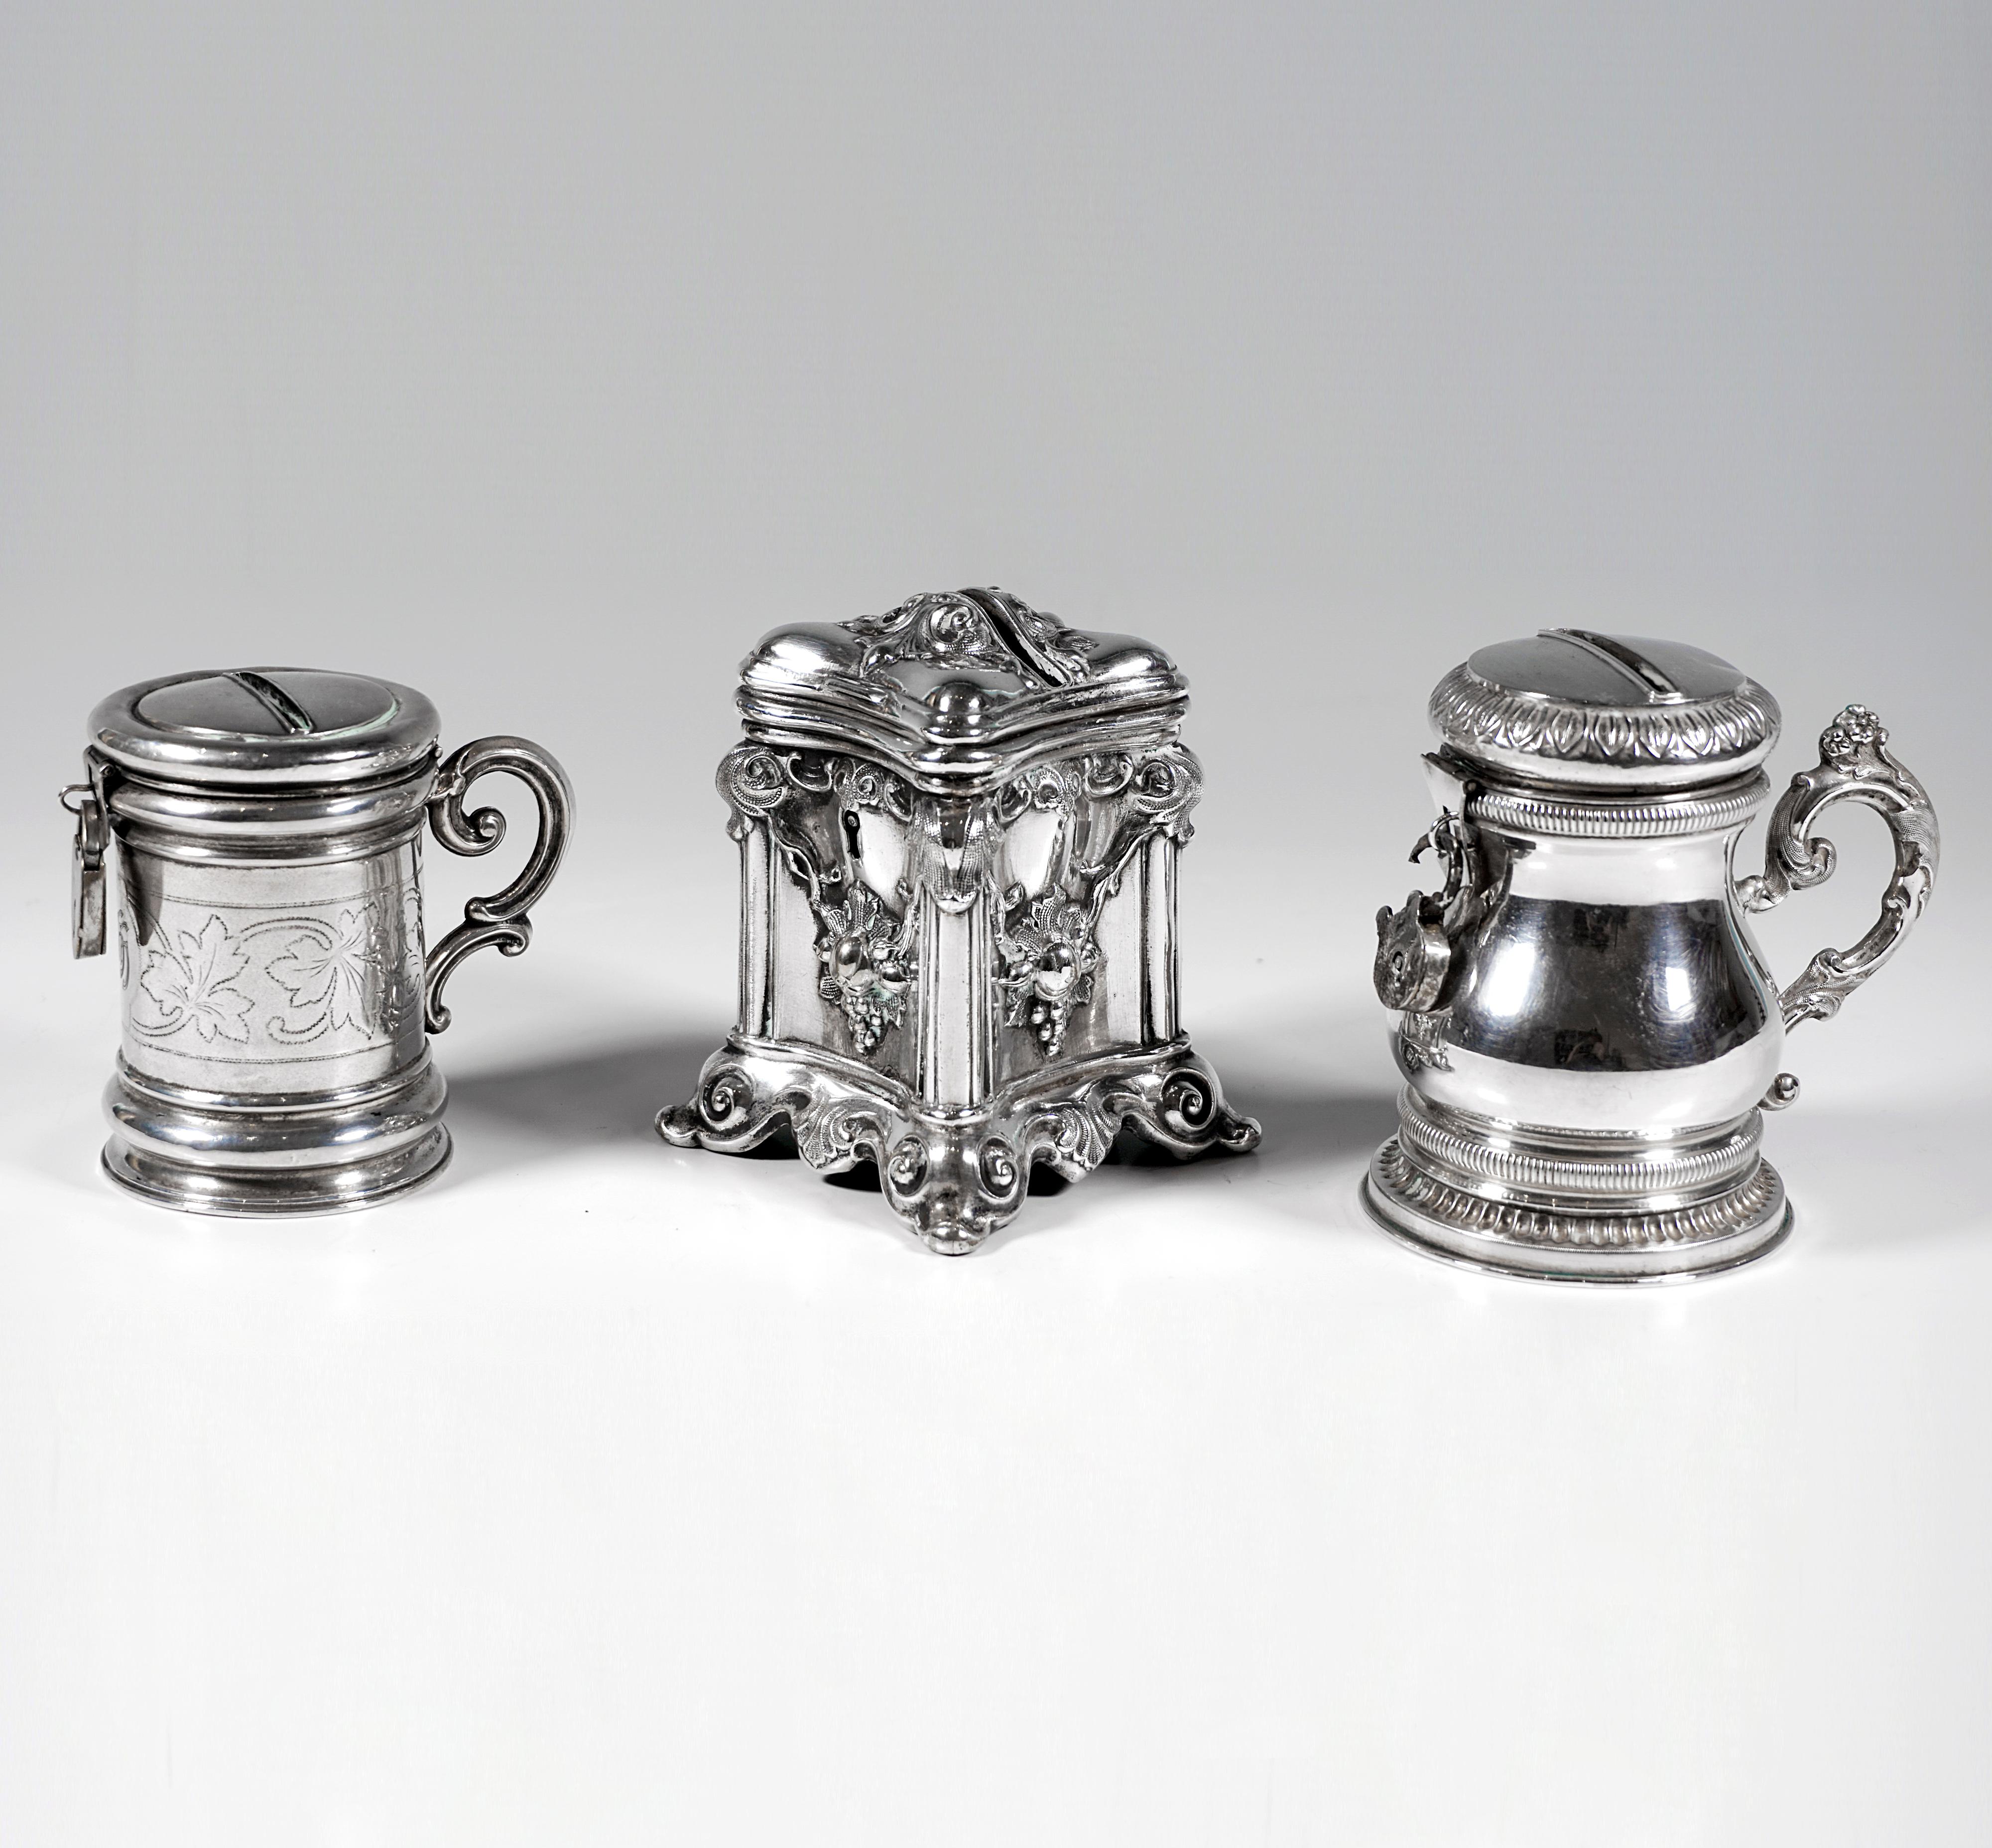 Three silver money boxes, two in tankard form with padlocks, one in cuboid form with built-in lock, hinged lids.

Dating:           19th Century
Material:        Silver 13 Lot ('812.5')
Total weight:  ca 260 grams / 9.15 oz / 8.36 troy oz
Measures: 